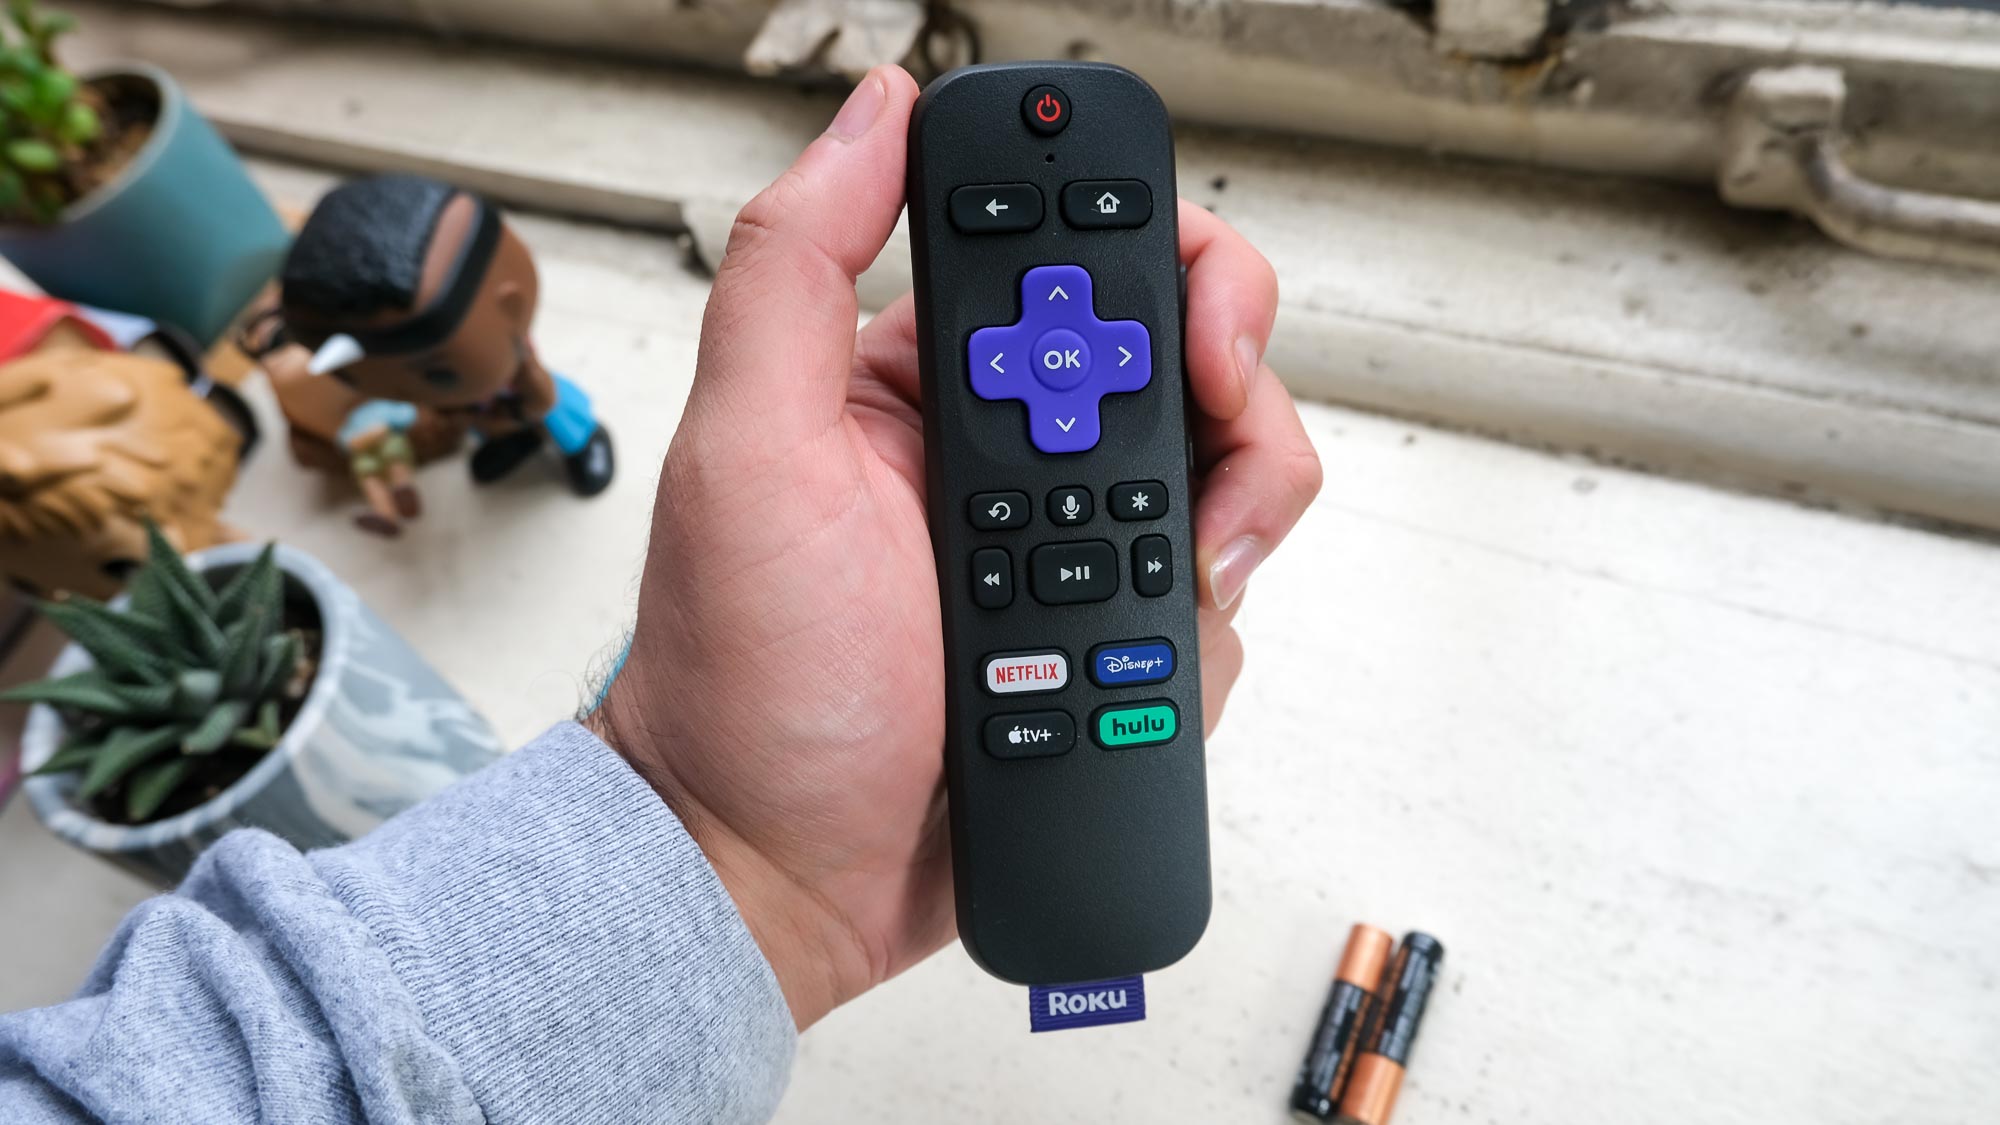 Roku Wi-Fi Connectivity Issues When Other Devices Are Fine